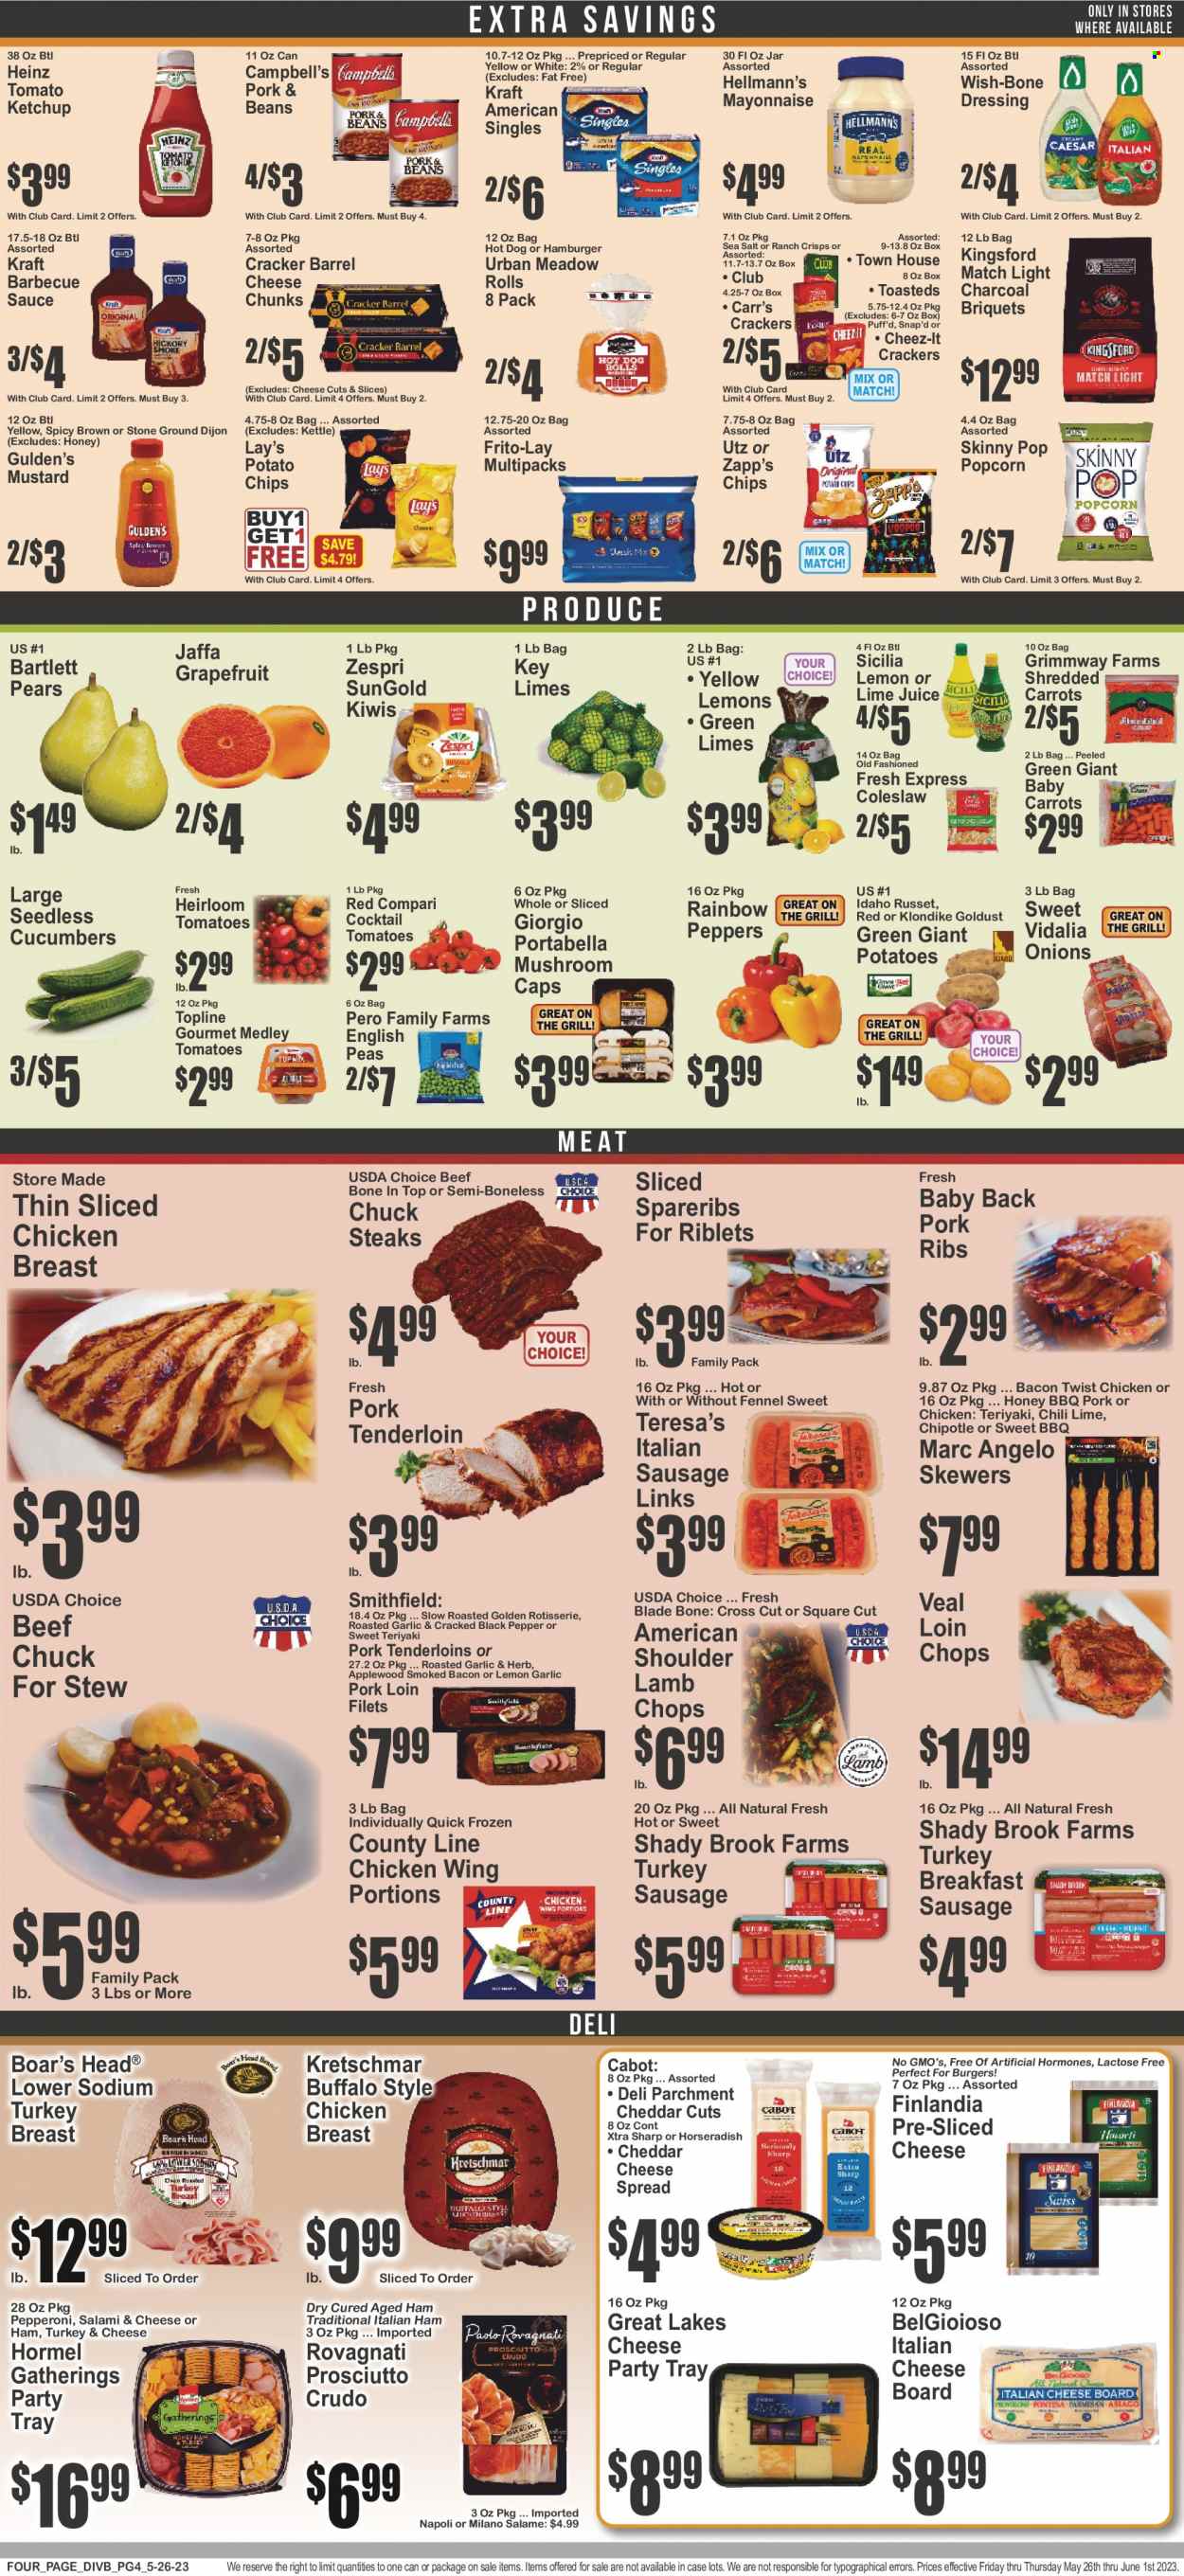 thumbnail - The Food Emporium Flyer - 05/26/2023 - 06/01/2023 - Sales products - mushrooms, beans, carrots, cucumber, russet potatoes, horseradish, peas, onion, peppers, Bartlett pears, grapefruits, kiwi, limes, pears, Campbell's, coleslaw, hot dog, hamburger, sauce, Kraft®, Hormel, Kingsford, Boar's Head, salami, prosciutto, sausage, pepperoni, italian sausage, cheese spread, sliced cheese, Kraft Singles, mayonnaise, Hellmann’s, crackers, potato chips, Lay’s, popcorn, Frito-Lay, Cheez-It, Skinny Pop, Heinz, fennel, black pepper, BBQ sauce, mustard, ketchup, dressing, honey, chicken breasts, chicken, turkey, steak, ribs, pork loin, pork meat, pork ribs, pork tenderloin, pork spare ribs, pork back ribs, lamb chops, lamb meat, XTRA. Page 4.